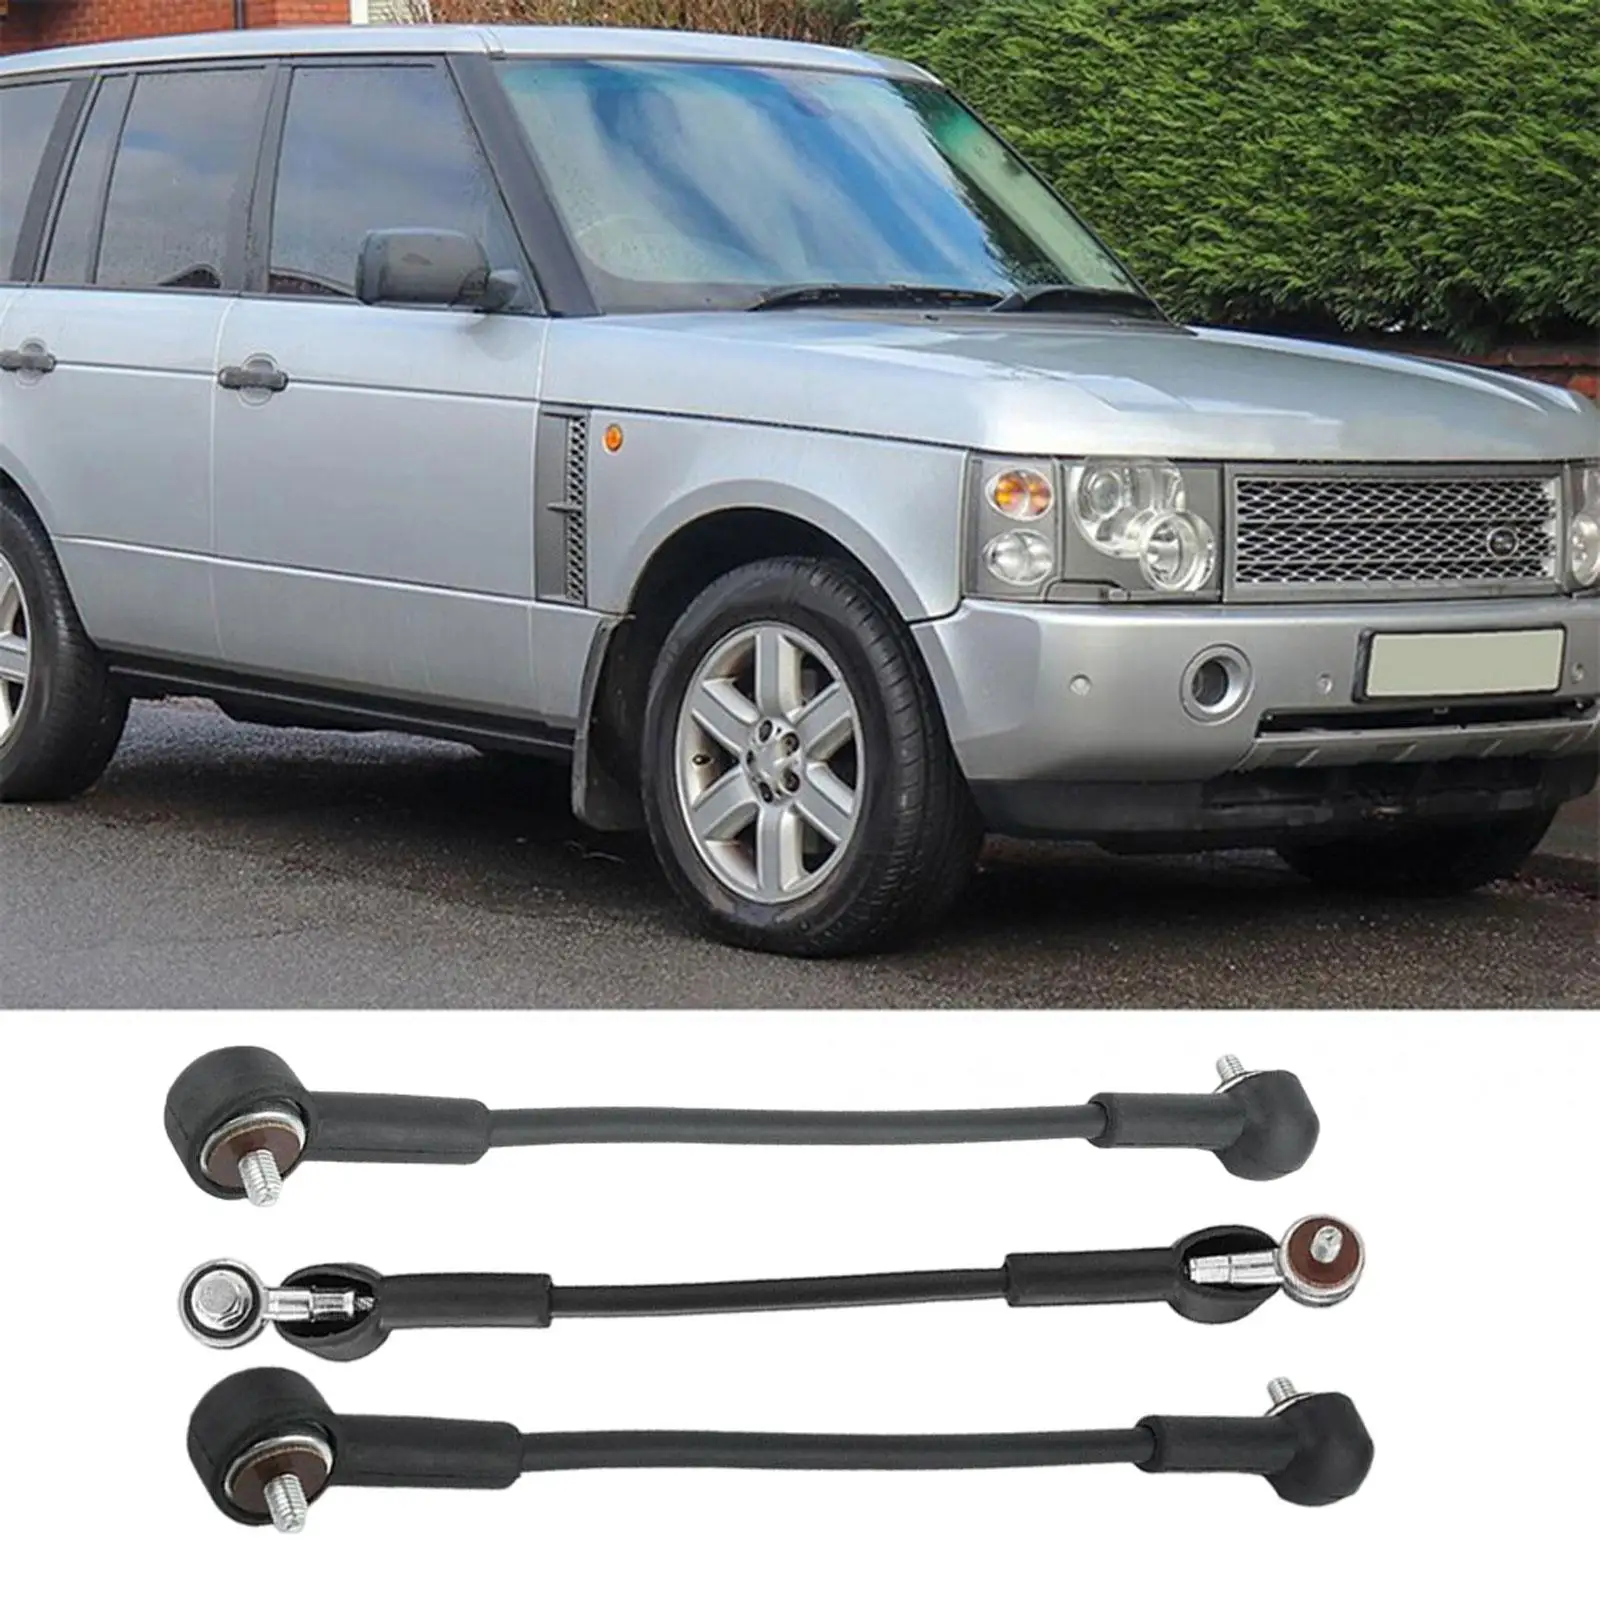 Vehicle Rear Tailgate Cable High Performance LR038051 for Range Rover L322 2002-2012 Parts Accessories Modification Repair